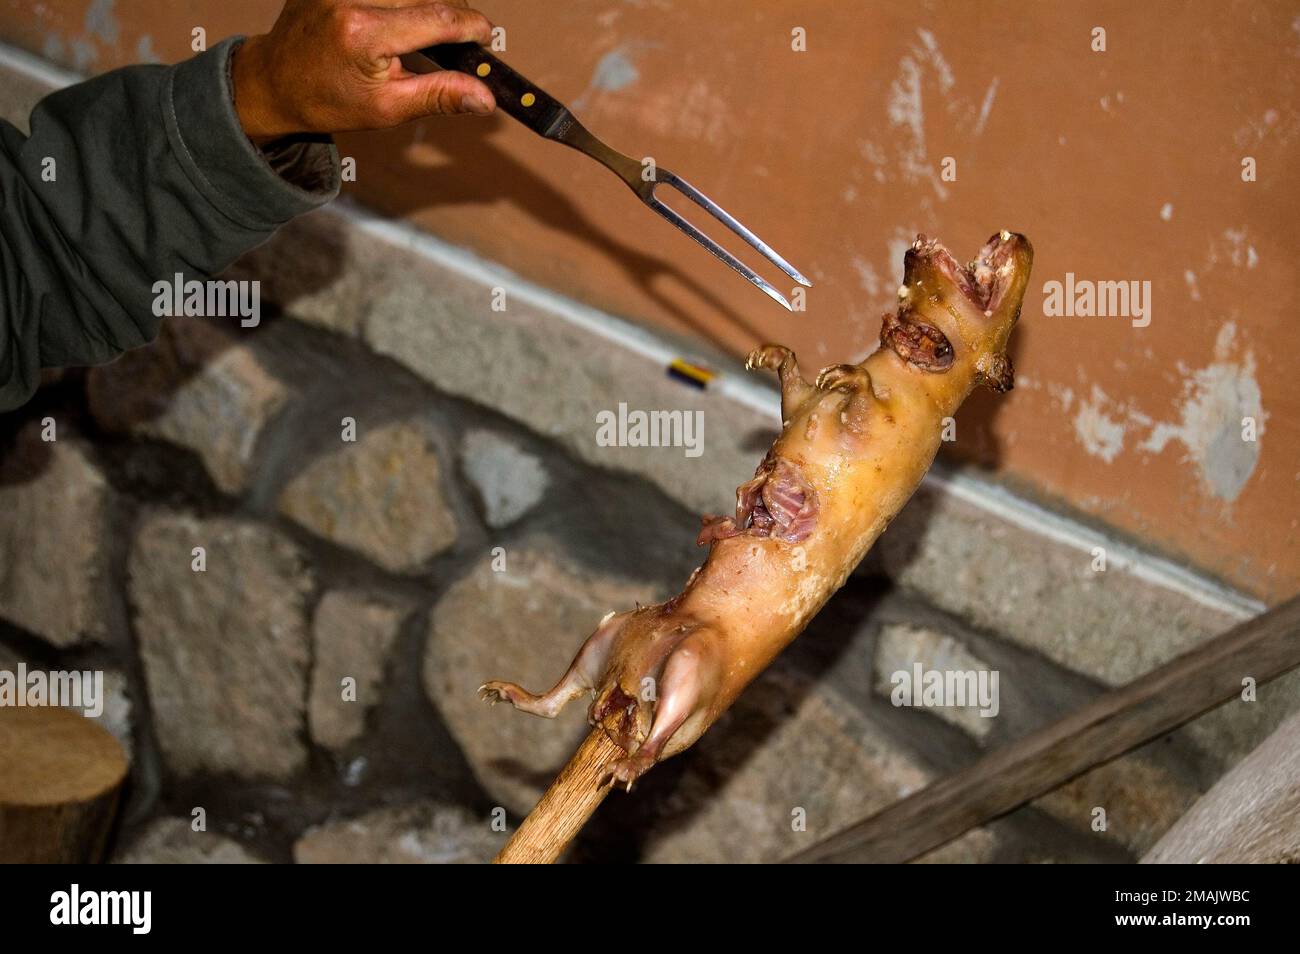 Human hand cooking a cuy following the traditional way. Guinea pig. Ecuador Stock Photo